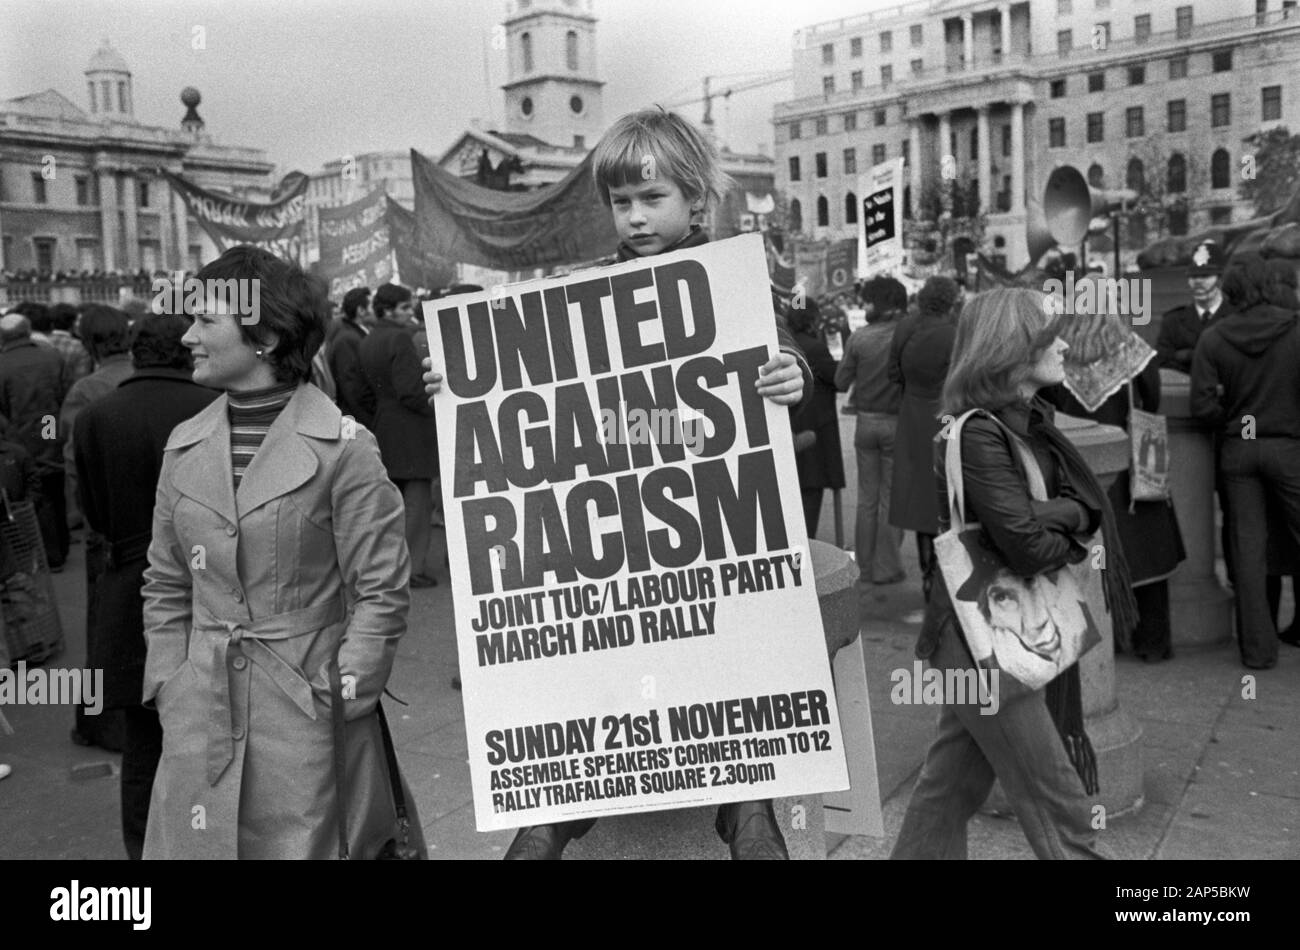 Racism 1970s London UK. United Against Racialism Labour Party and TUC rally and march Trafalgar Square 1976 England. HOMER SYKES Stock Photo